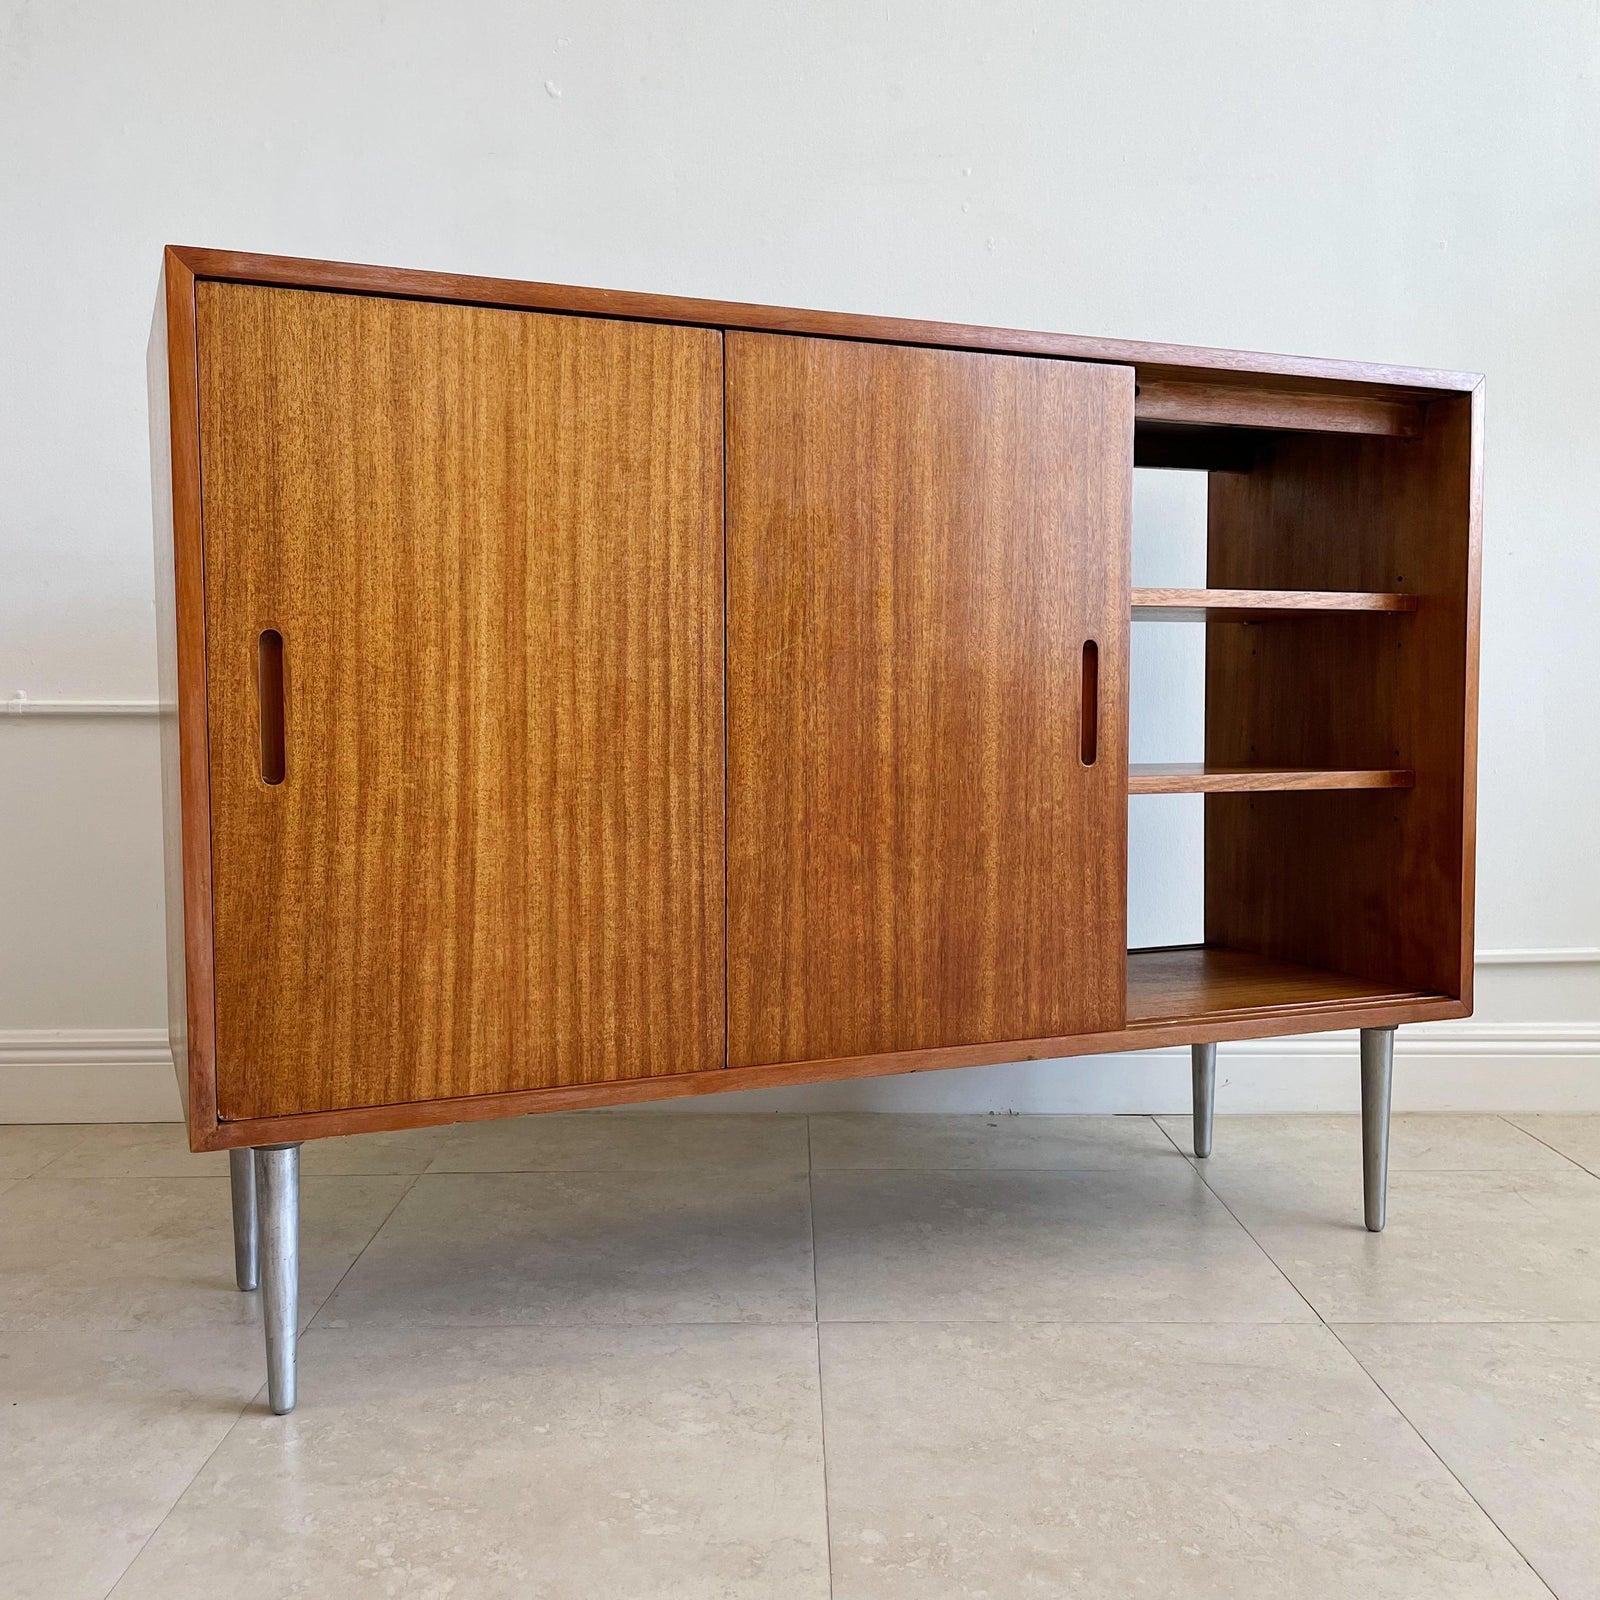 Custom designed by Edward Wormley for Dunbar this cleverly designed walnut credenza, sideboard, room divider has 3 sliding doors on both sides revealing shelving on either side. This is perfect to float in a room as it can be accessed on both sides,